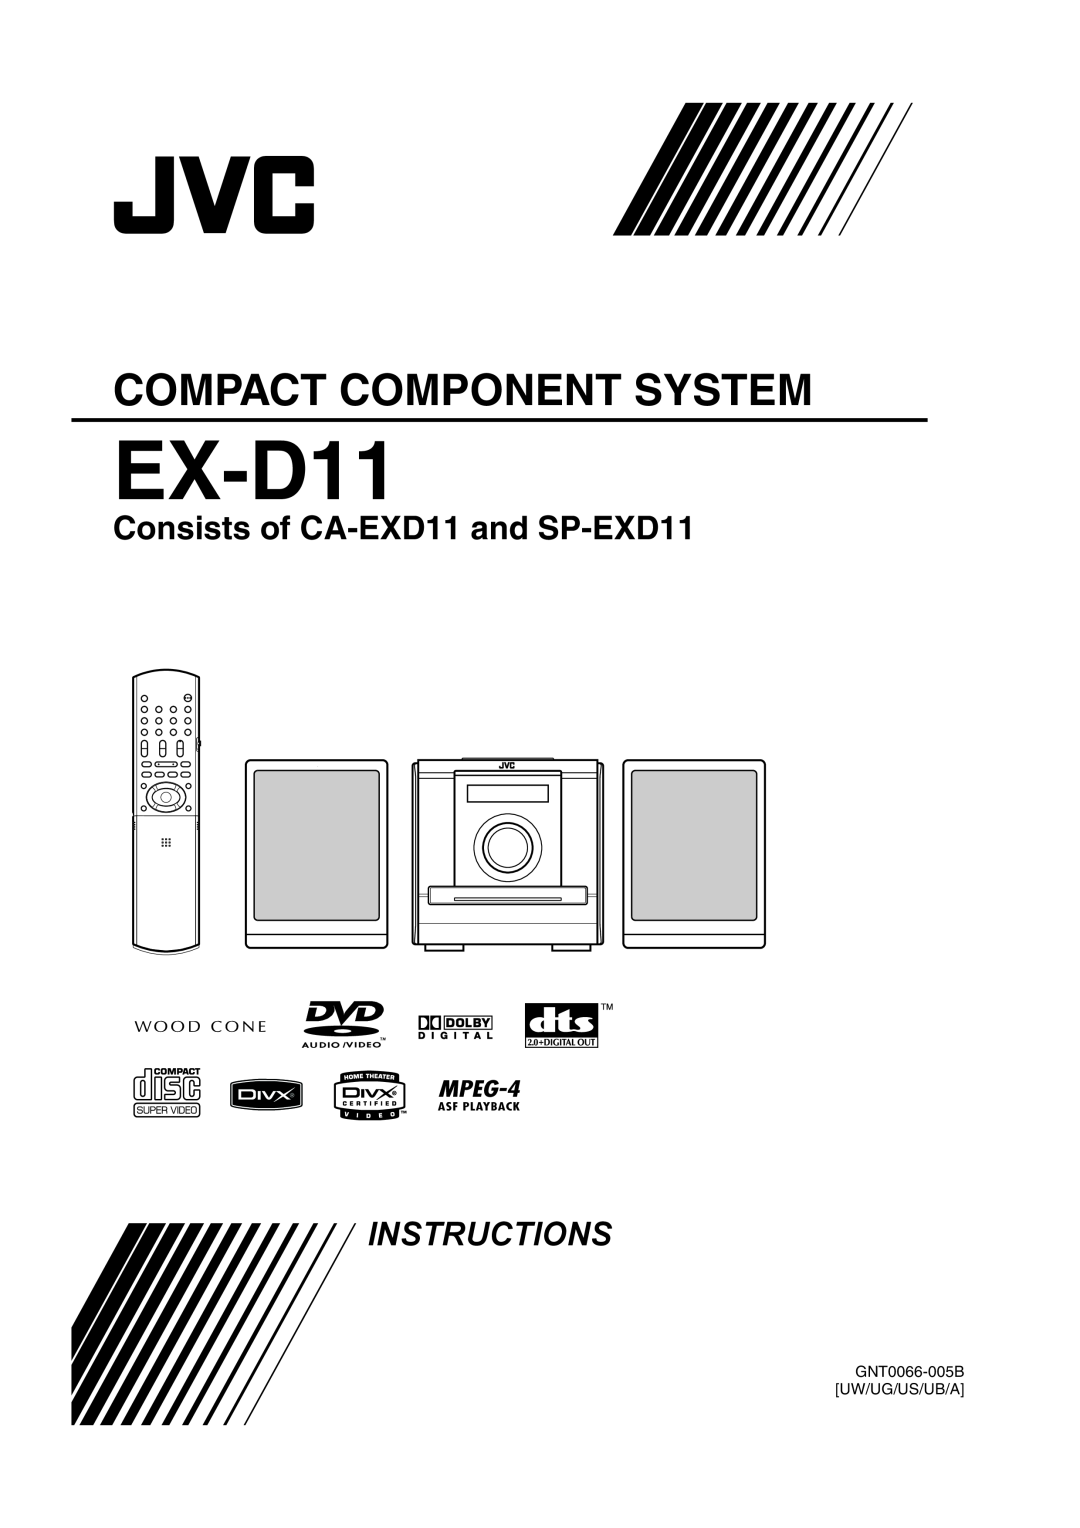 JVC EX-D11 manual Compact Component System, Consists of CA-EXD11and SP-EXD11, Instructions, GNT0066-005BUW/UG/US/UB/A 